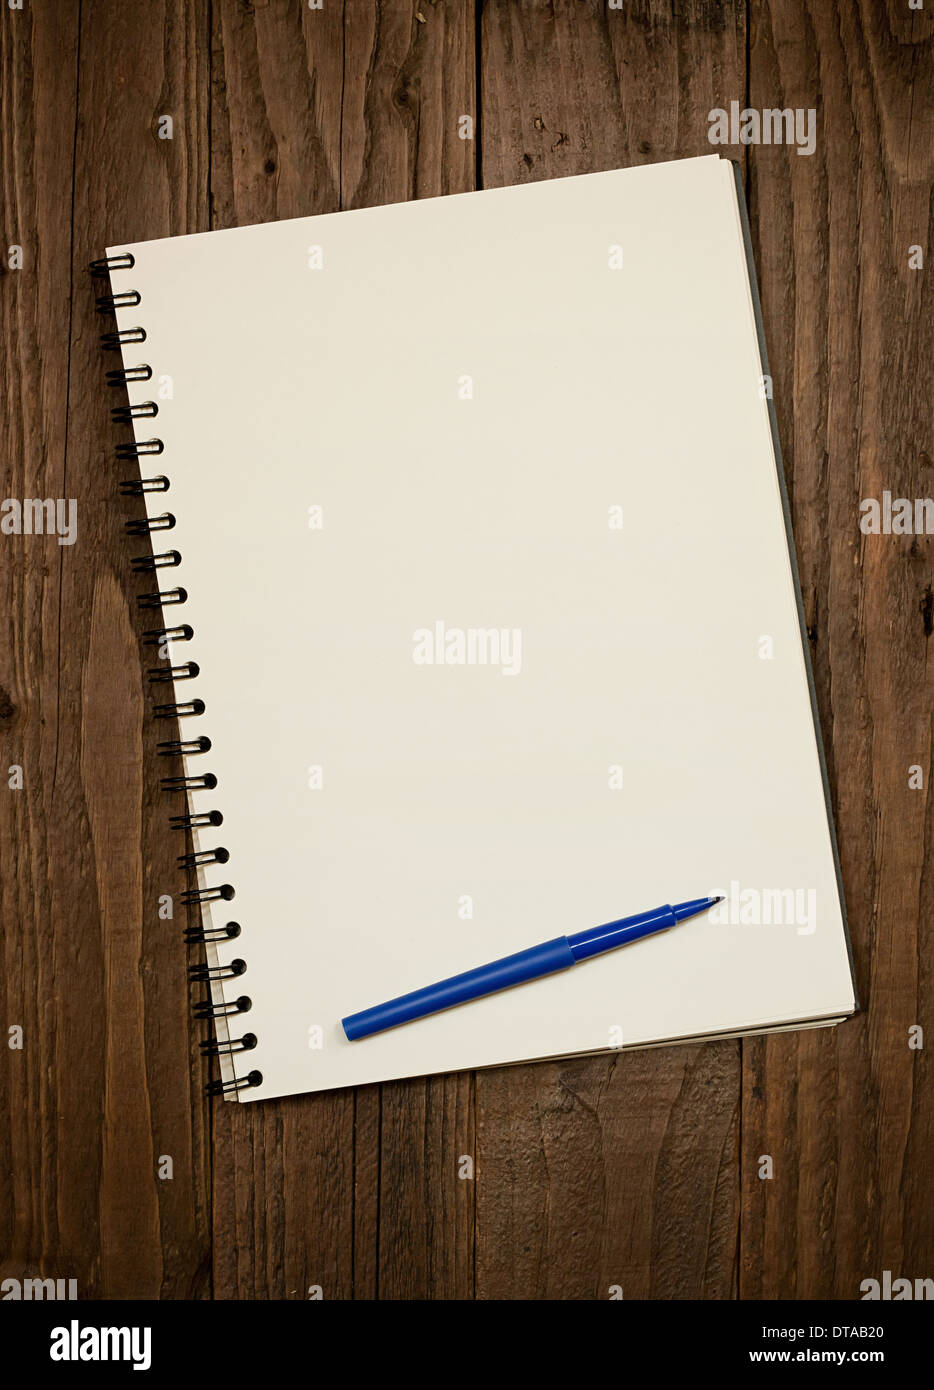 Blank spiral bound scrapbook on a rustic wooden background with copy space and pen at foot of pad. Stock Photo